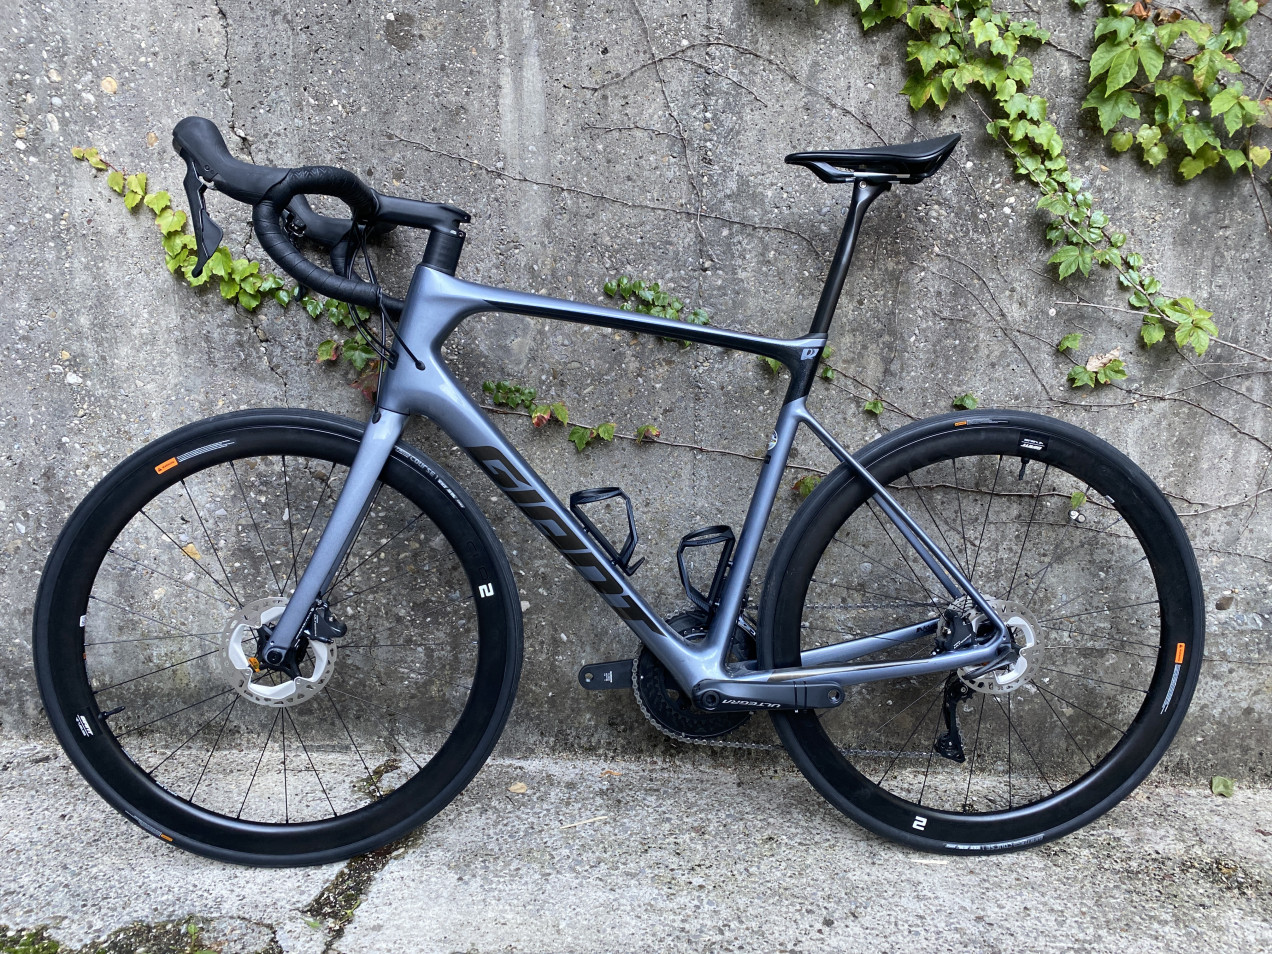 Giant Defy Advanced Pro 1 used in 58 cm buycycle